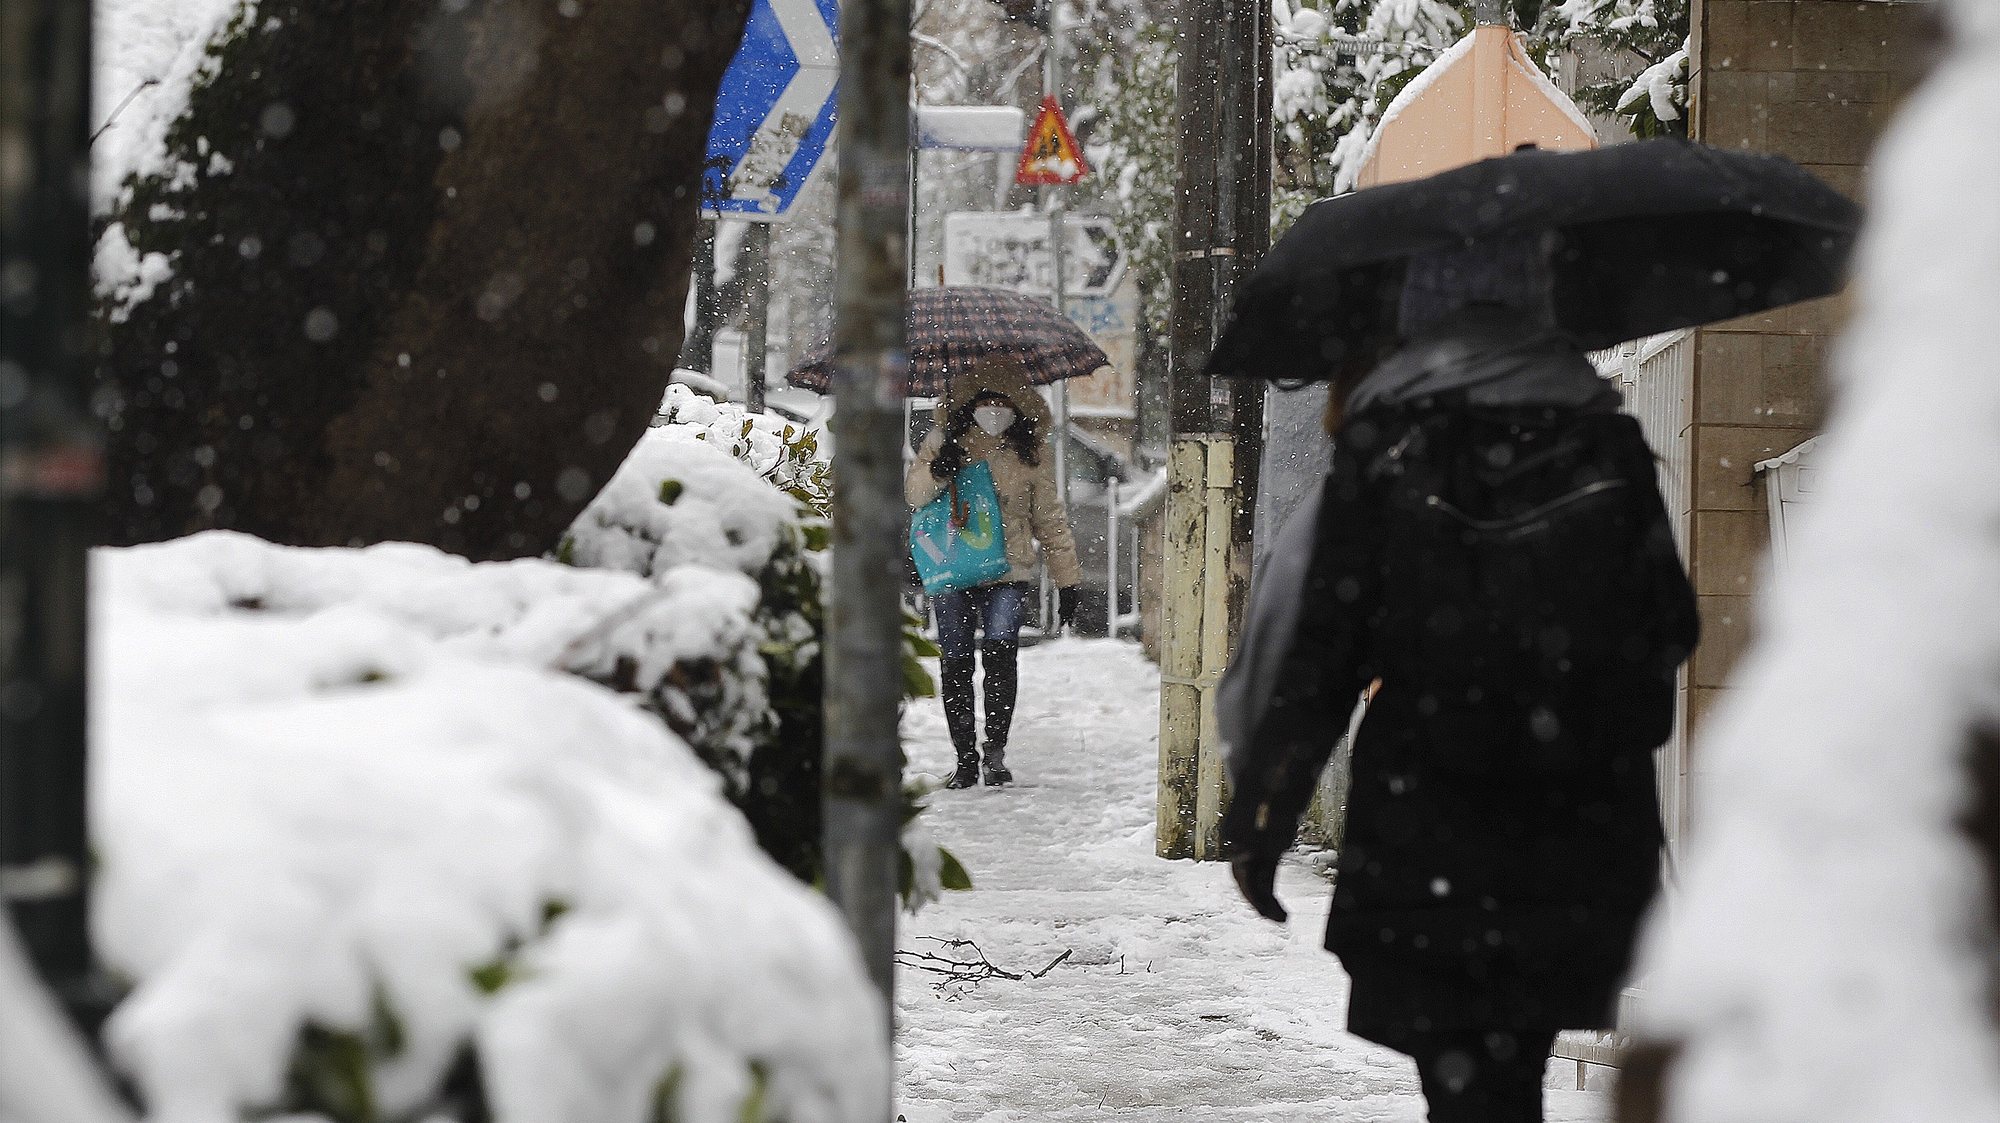 epa09014439 Women walk on a street during a heavy snowfall in northern Athens, Greece, 15 February 2021.  The first wave of the Medea weather system was fully underway in Greece on 14 February, bringing snow to many parts of the country, with the northern suburbs of Attica expected to see snow fall from 14 February afternoon. According to the National Observatory of Athens weather service, quite heavy snow is expected in Central and northern Greece, as well as at higher altitudes.  EPA/ALEXANDROS VLACHOS